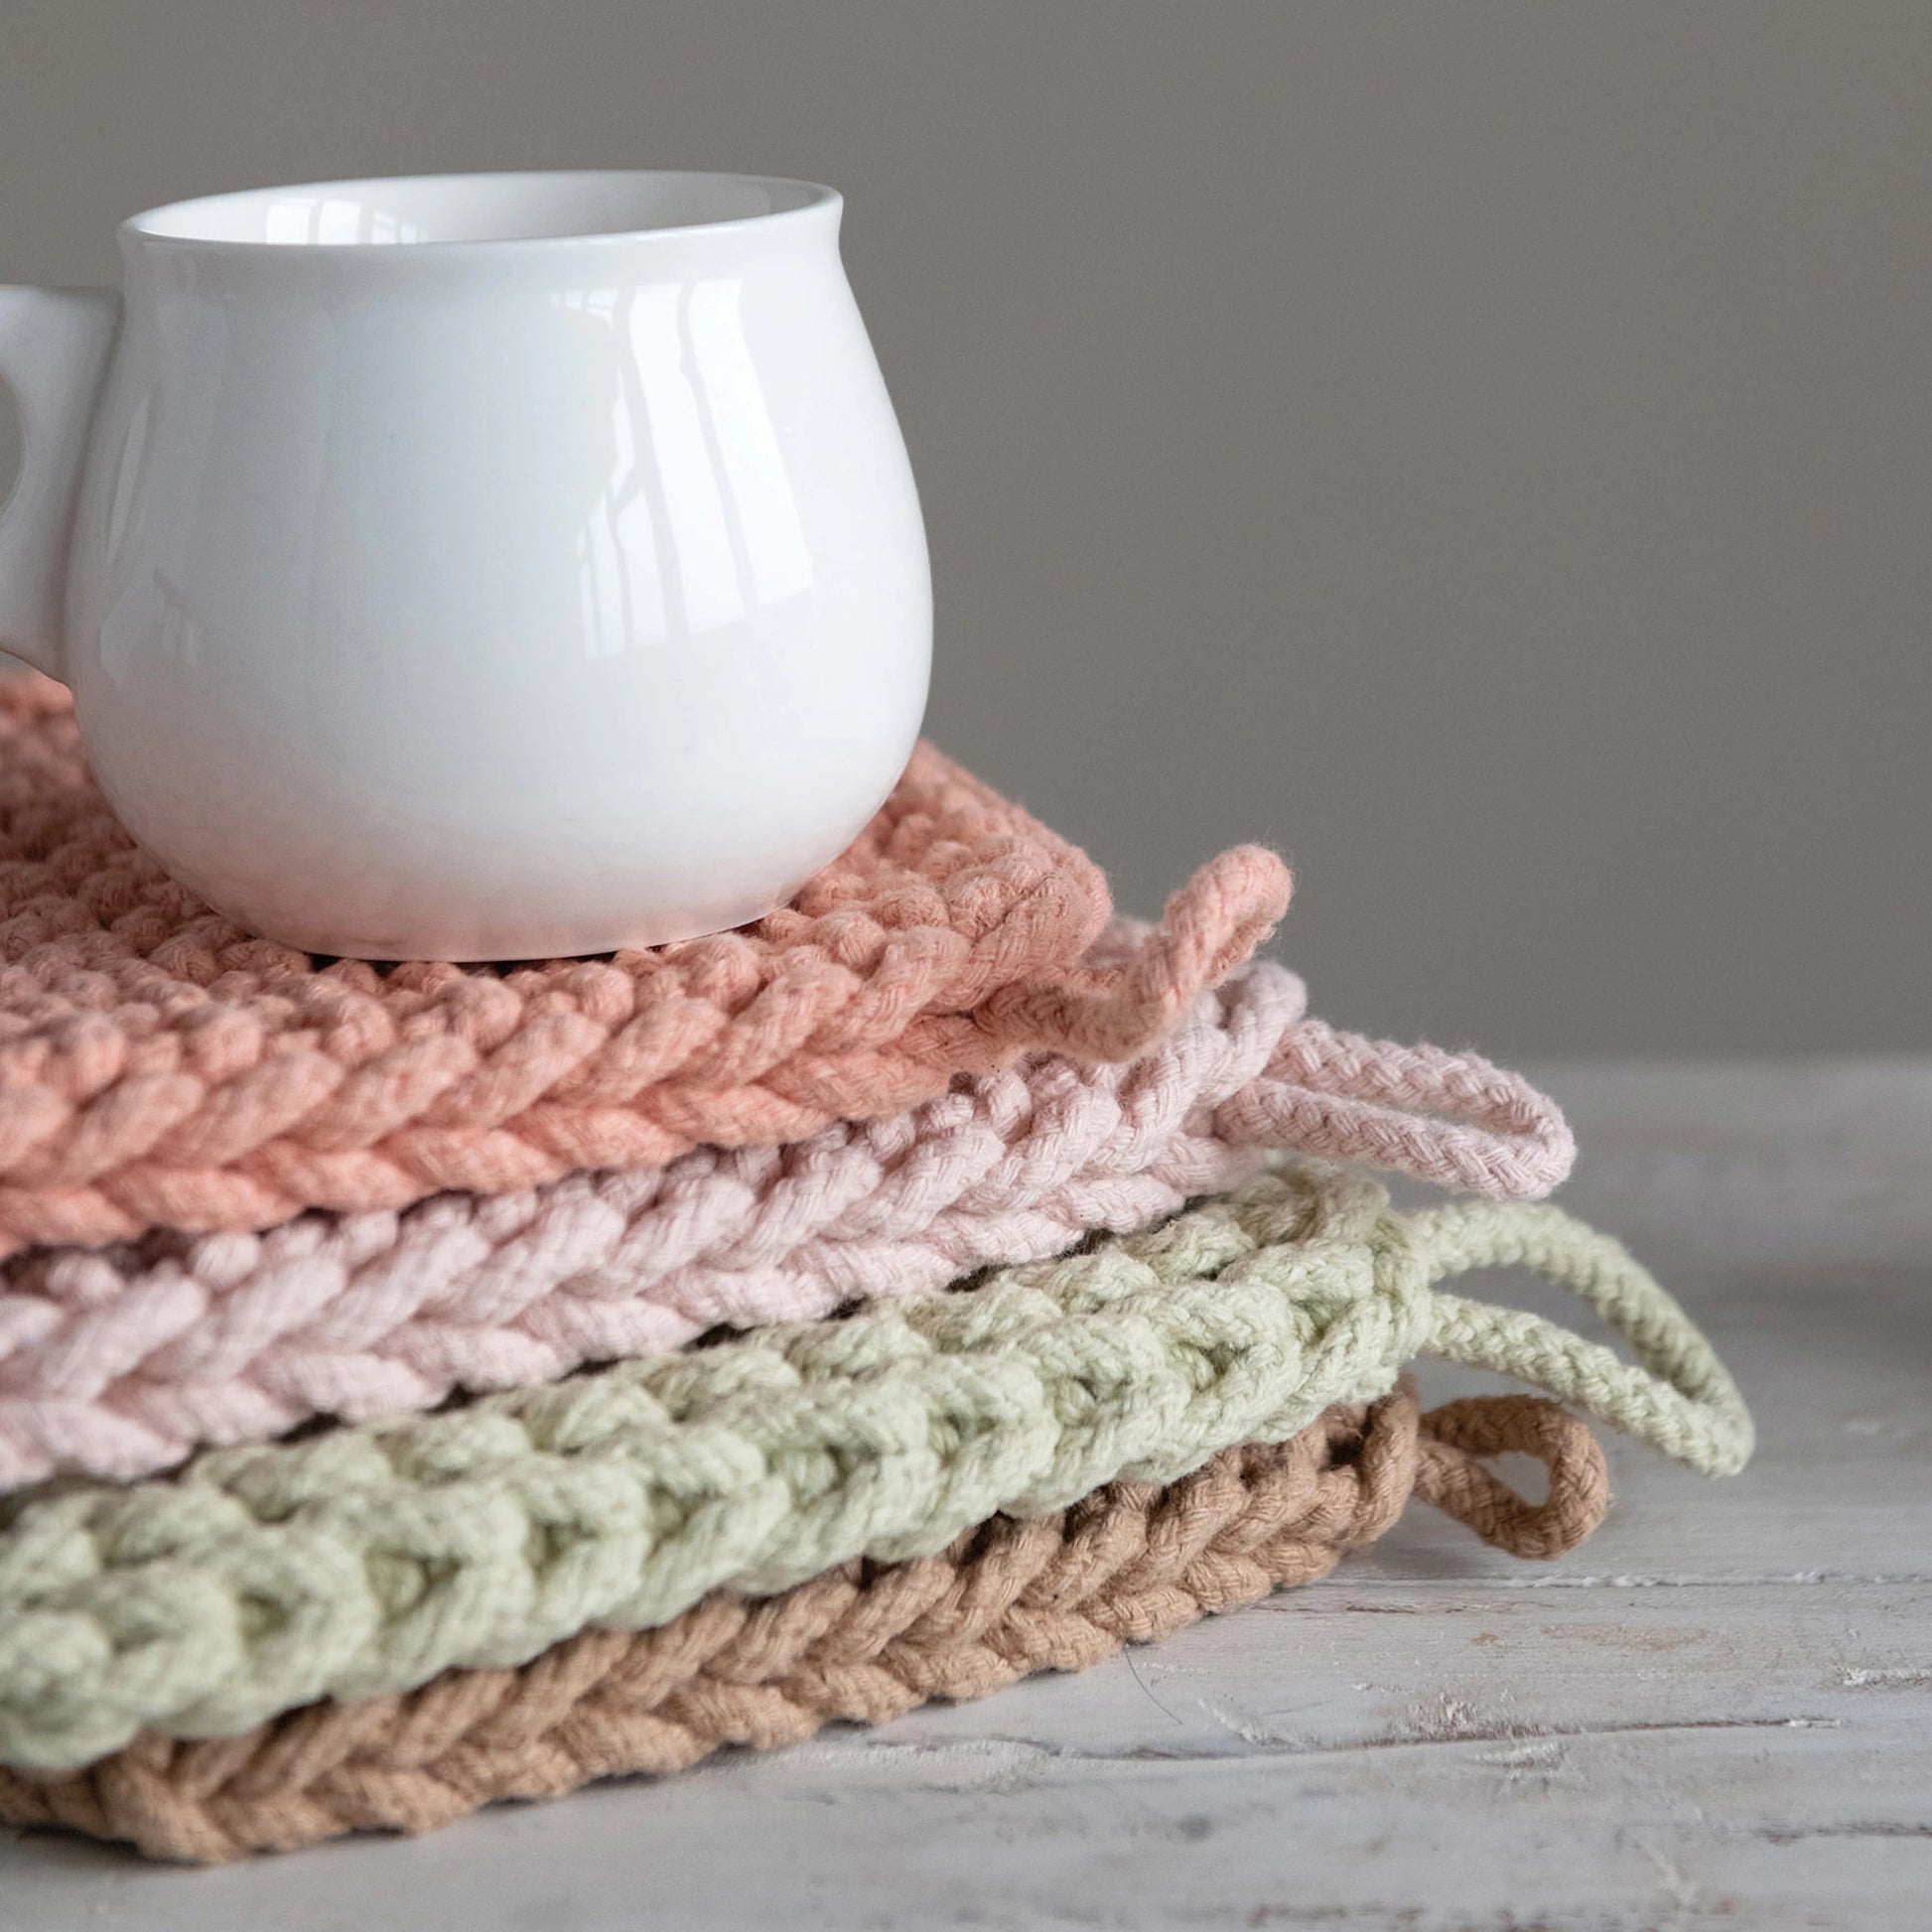 Spring Square Crocheted Pot Holder – IntuitionMurray